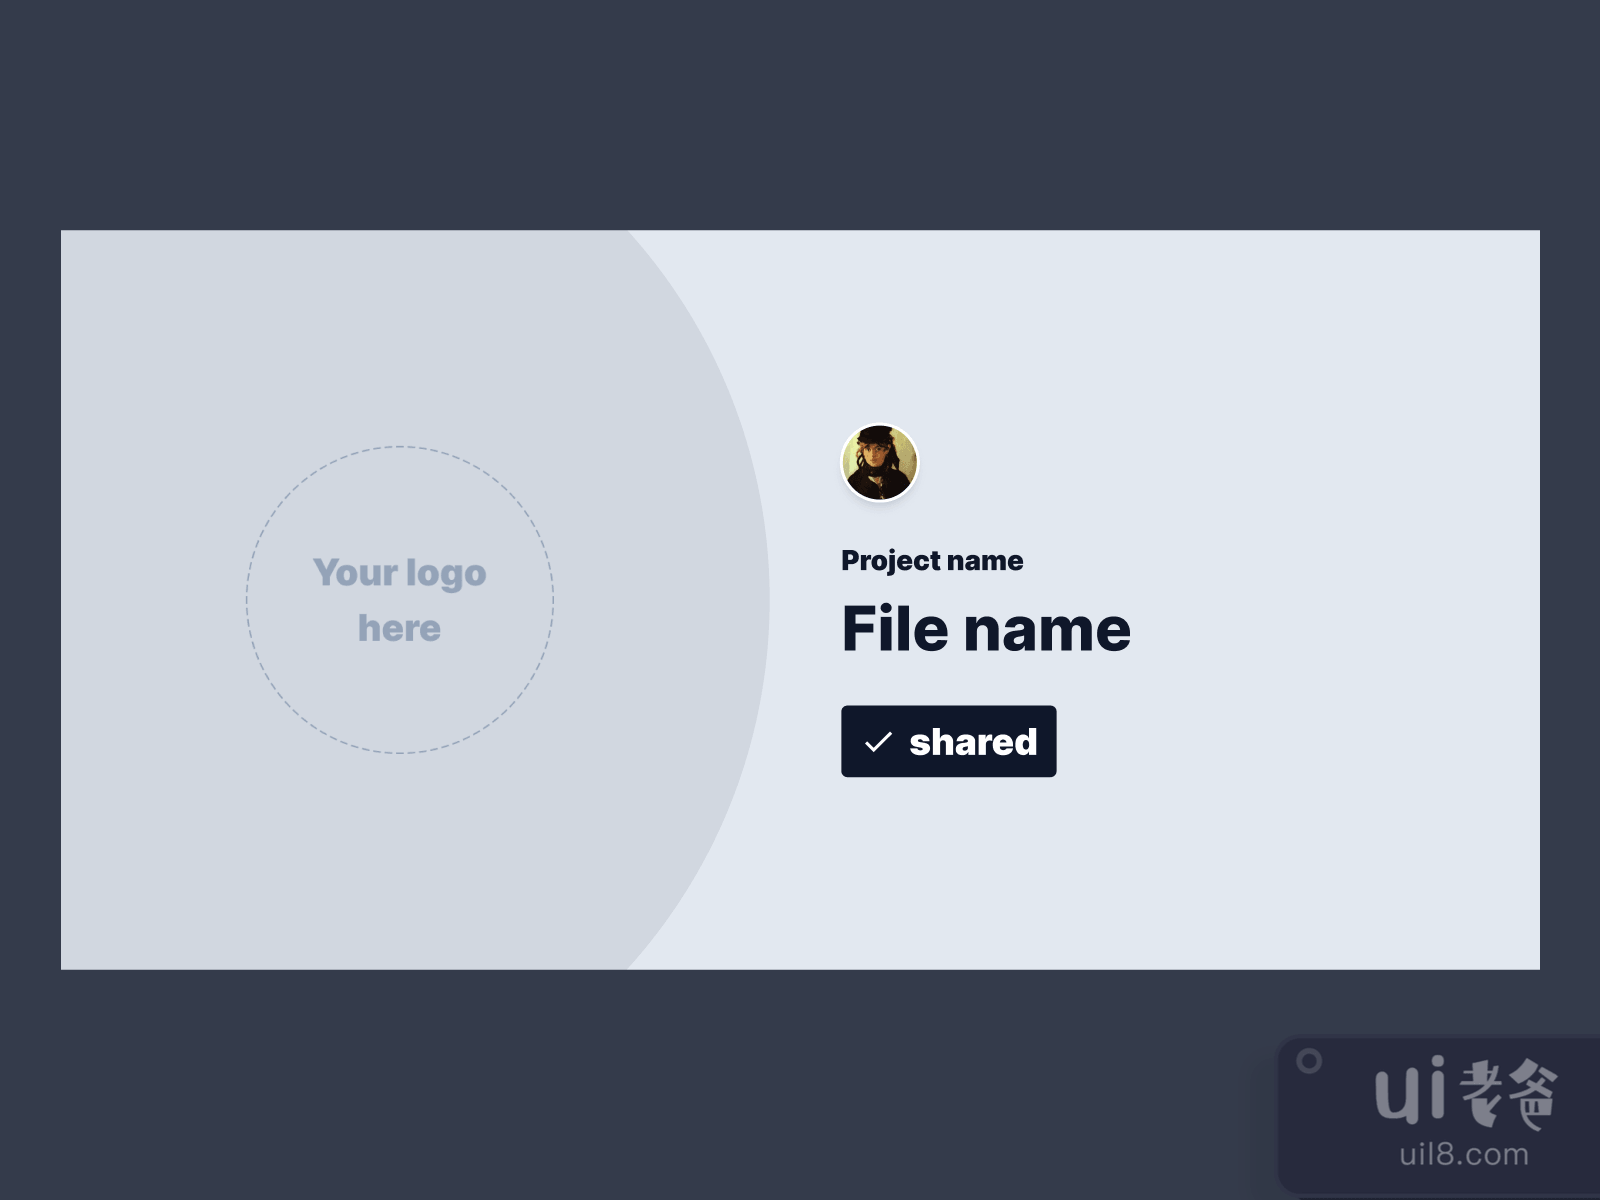 FLOW Wireframe UI Kit for Figma and Adobe XD No 4